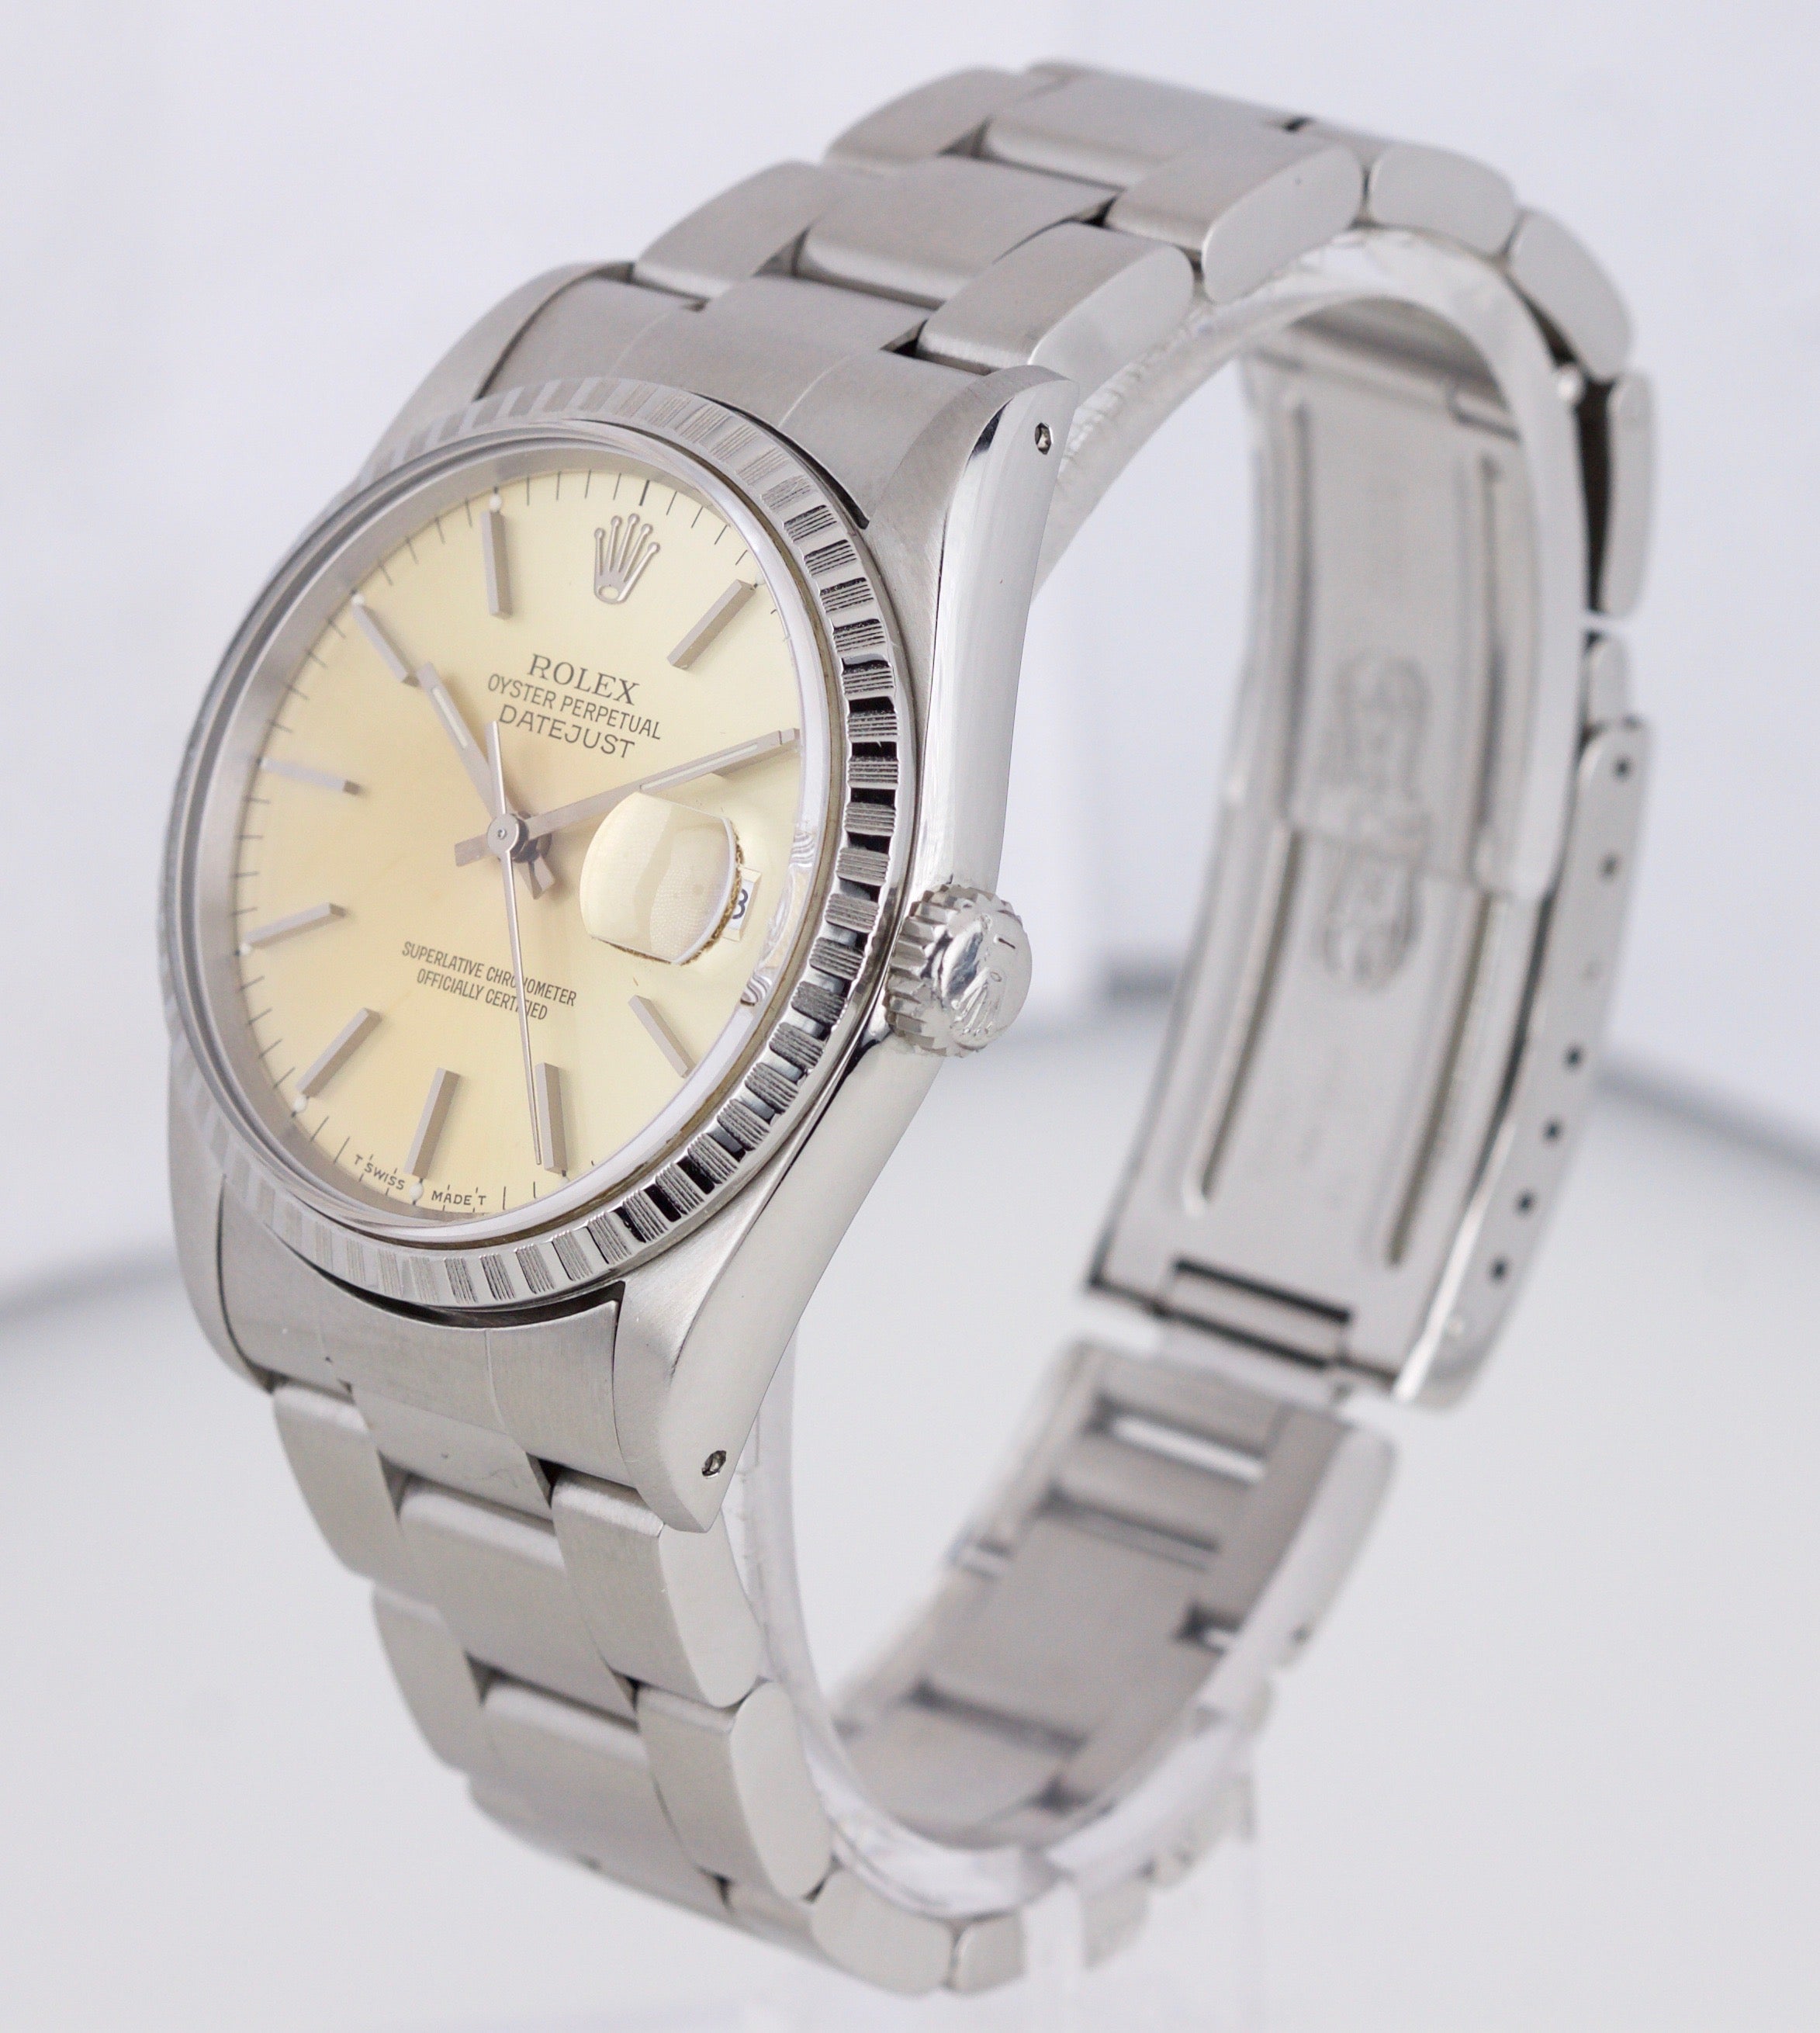 1994 Rolex DateJust Silver Tone Patina 36mm S 16220 Stainless Steel Oyster Watch